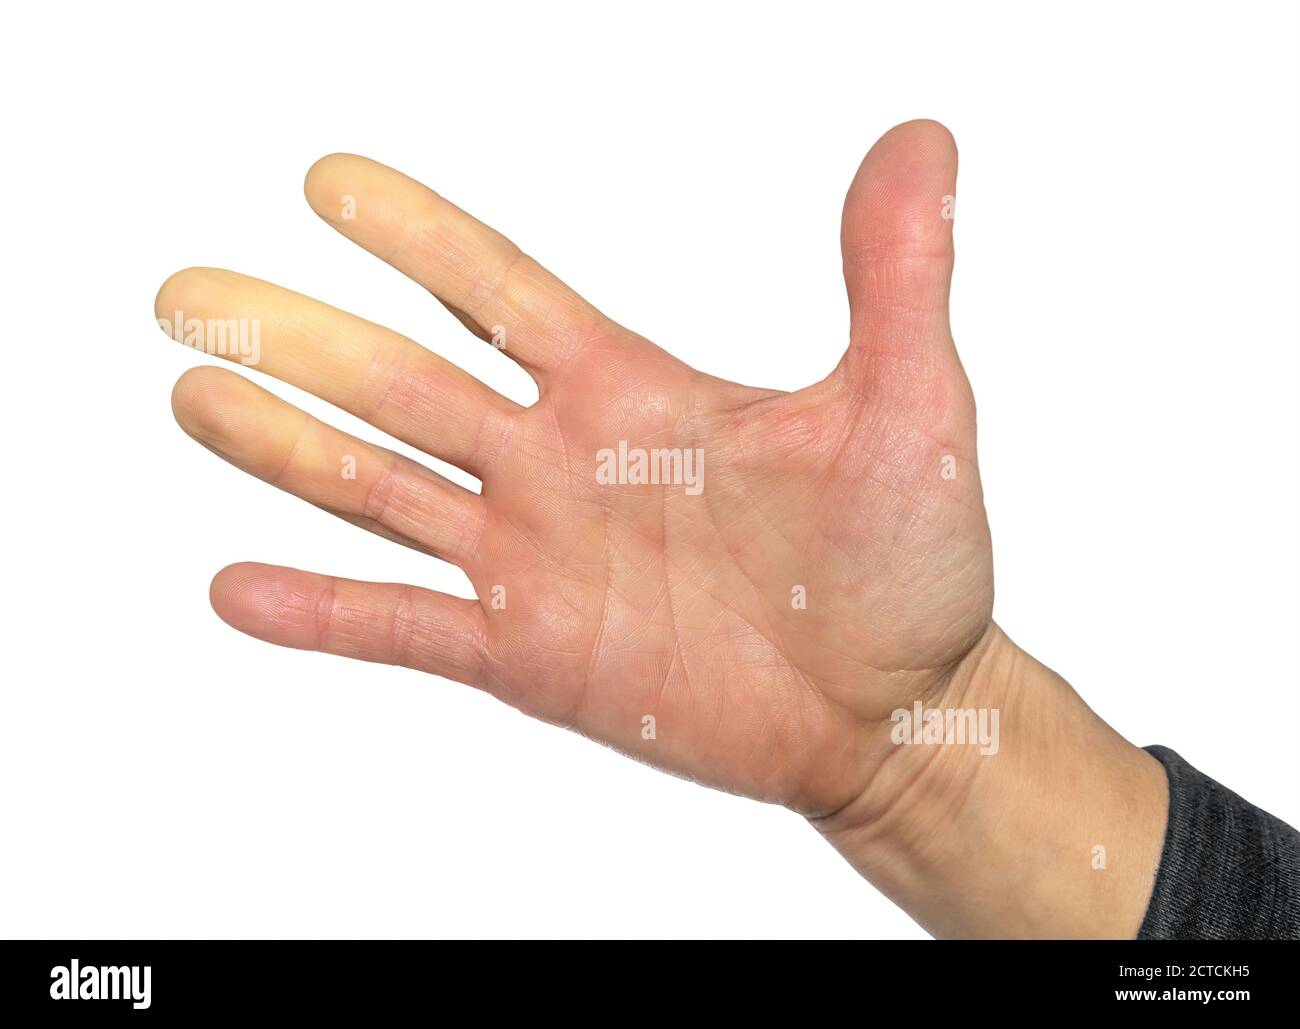 Hand with Raynaud's syndrome, Raynaud's phenomenon or Raynaud's  diseases. Female hand. Fingers turned white (pallor) due to lack of blood flow. Stock Photo